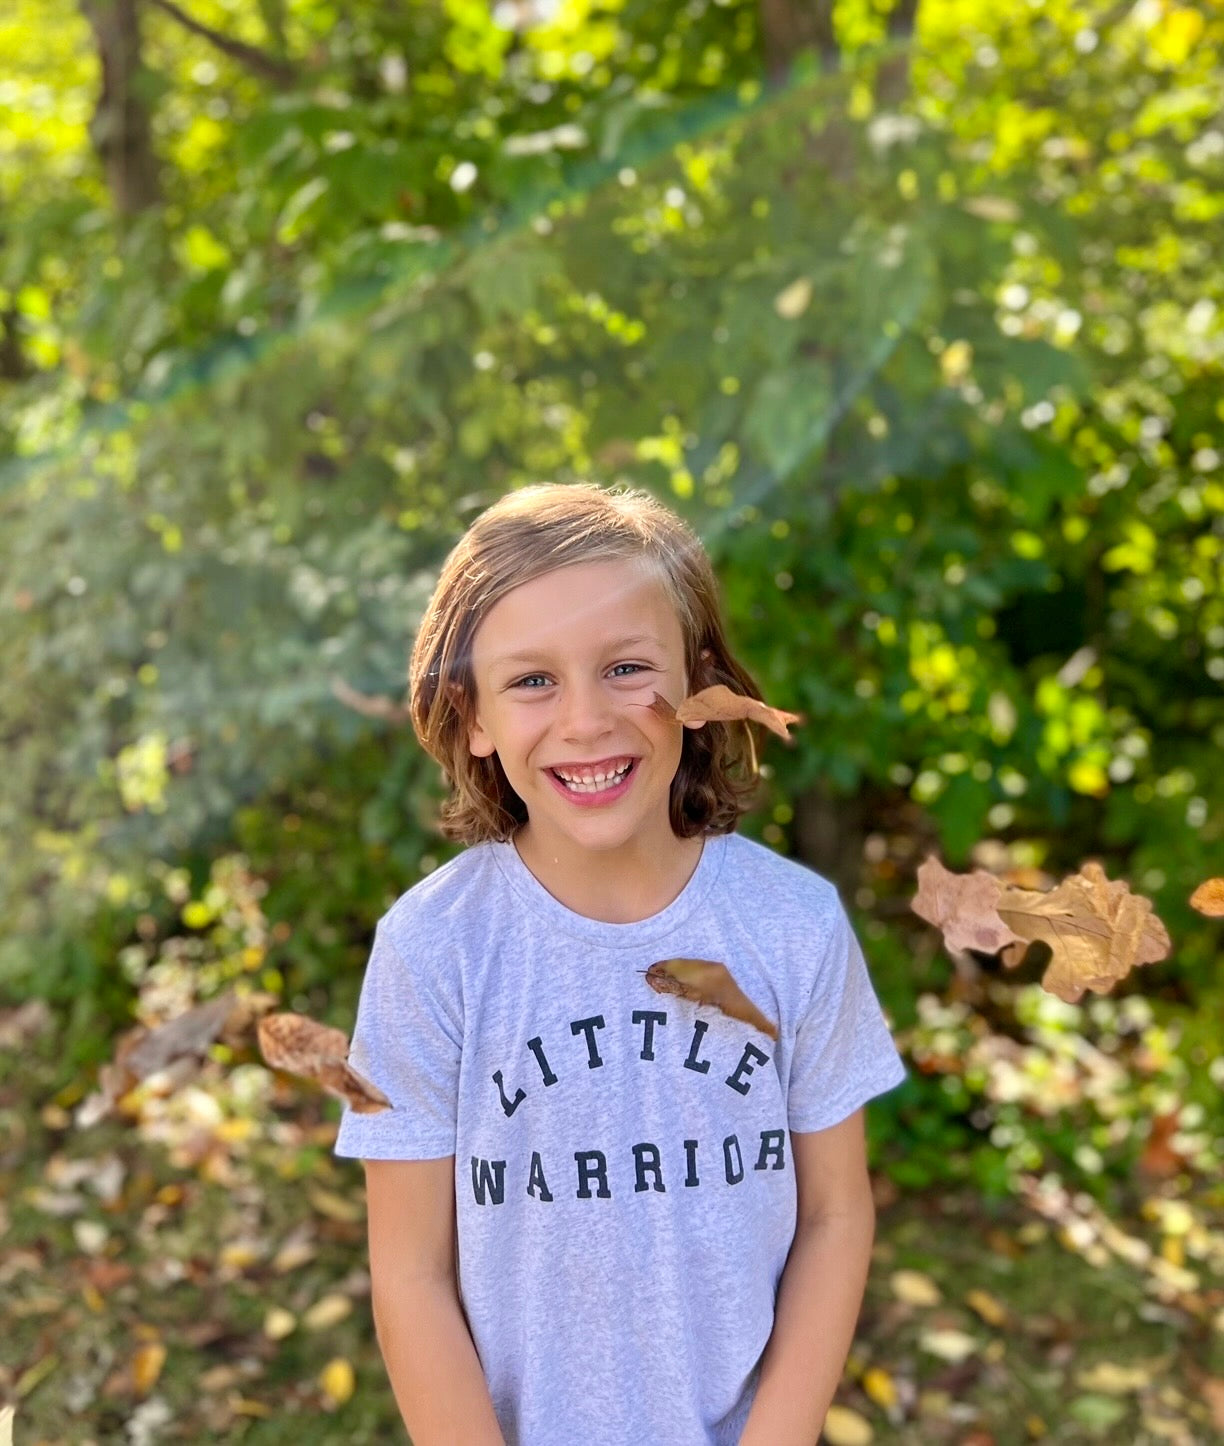 Kids and Toddler Little Warrior Tee